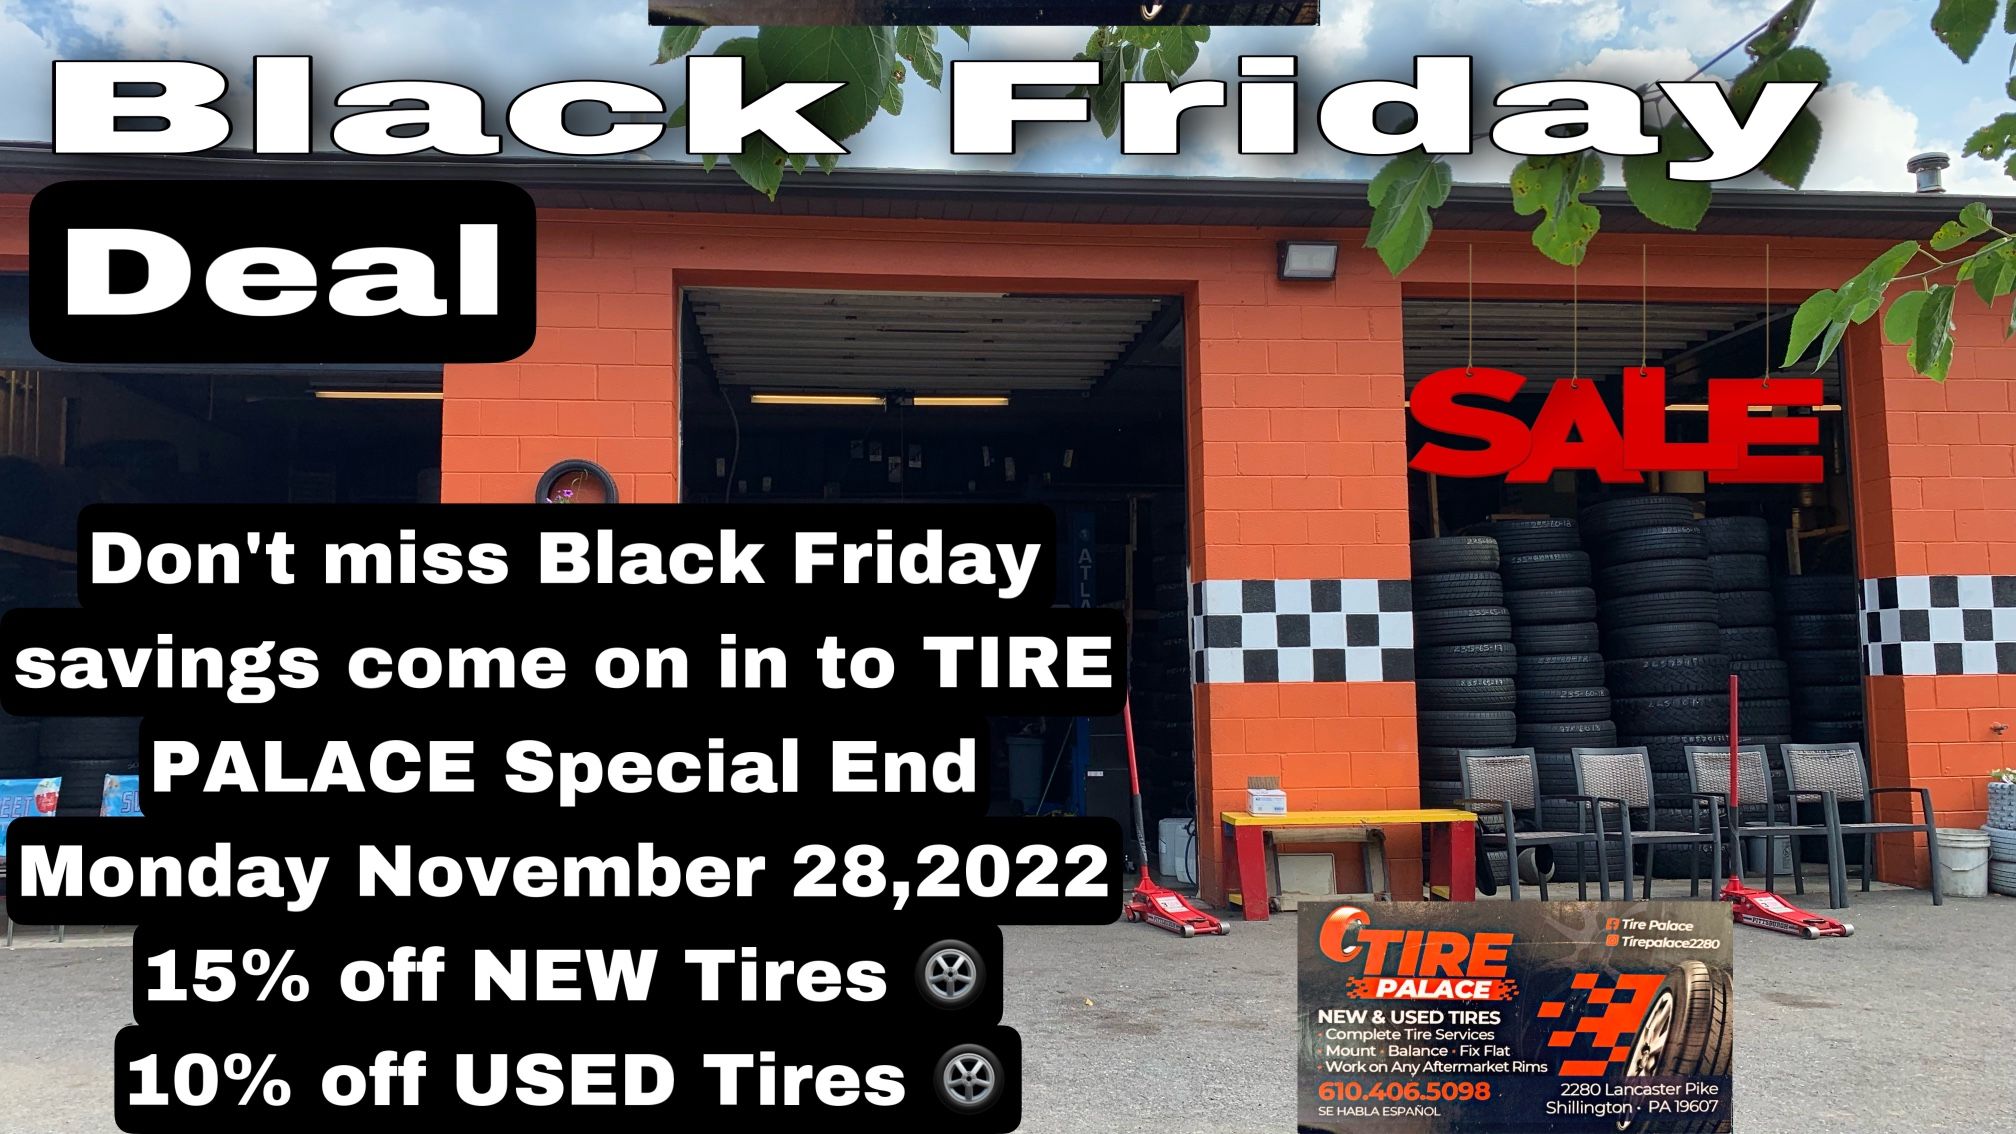 Used Tires & New Tires Black Friday Special